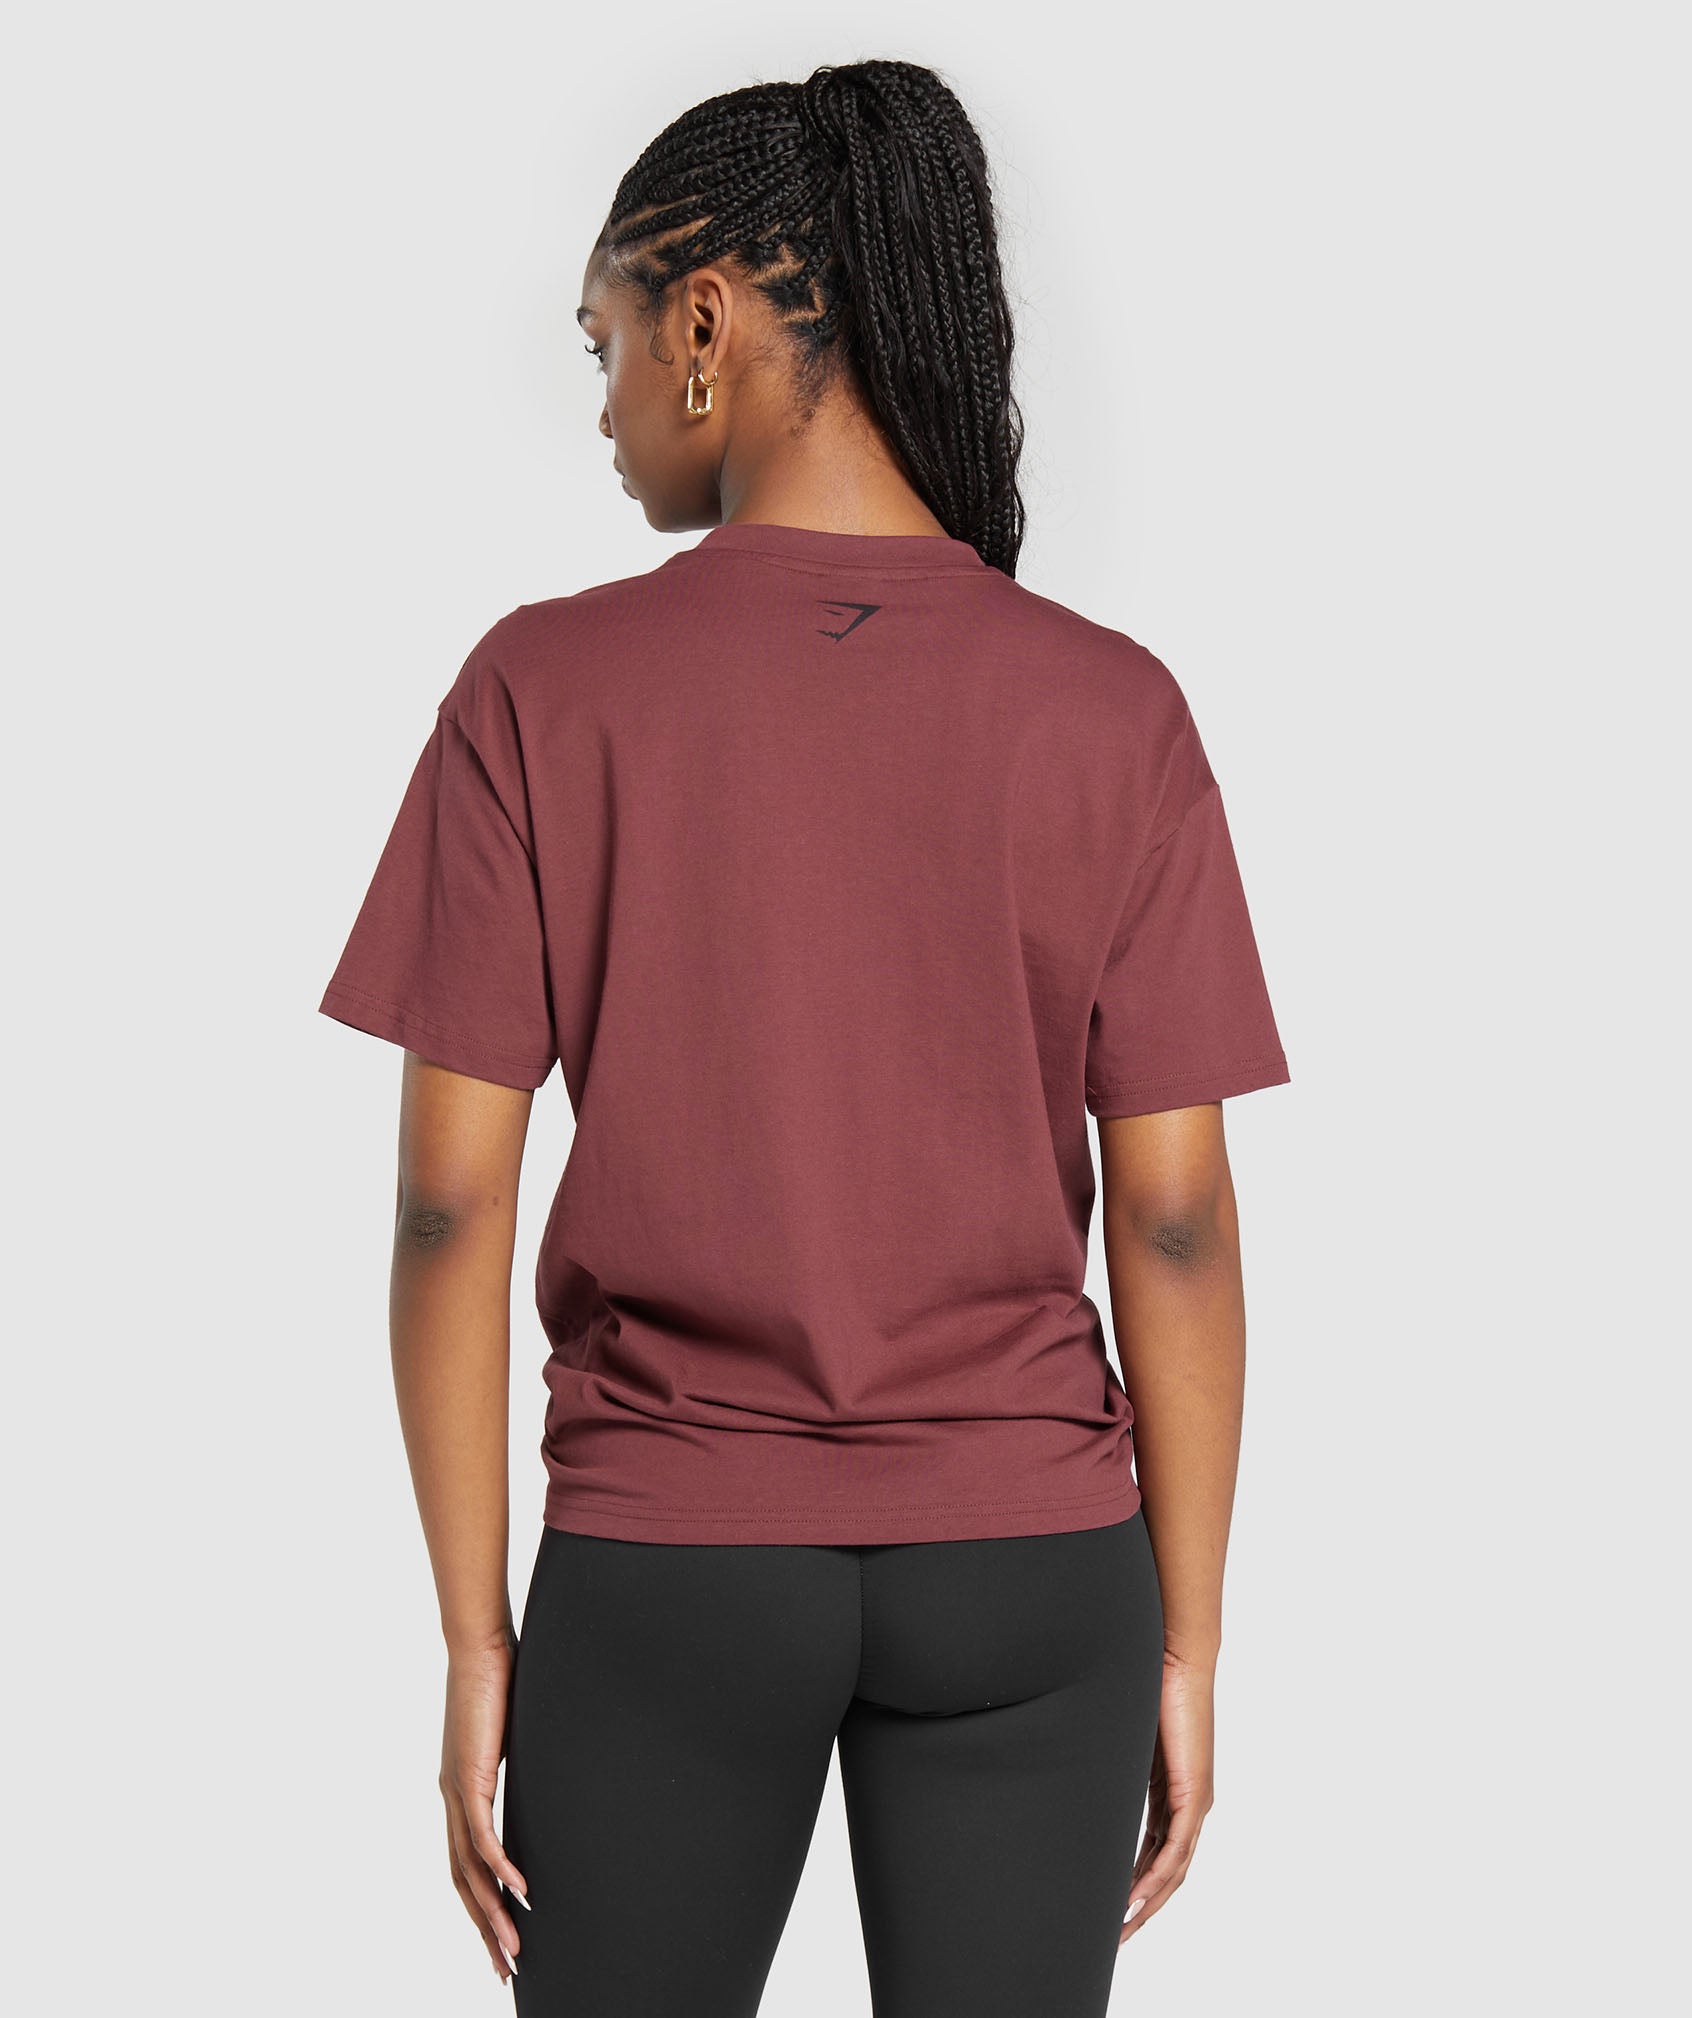 Built Oversized T-Shirt in Washed Burgundy - view 3